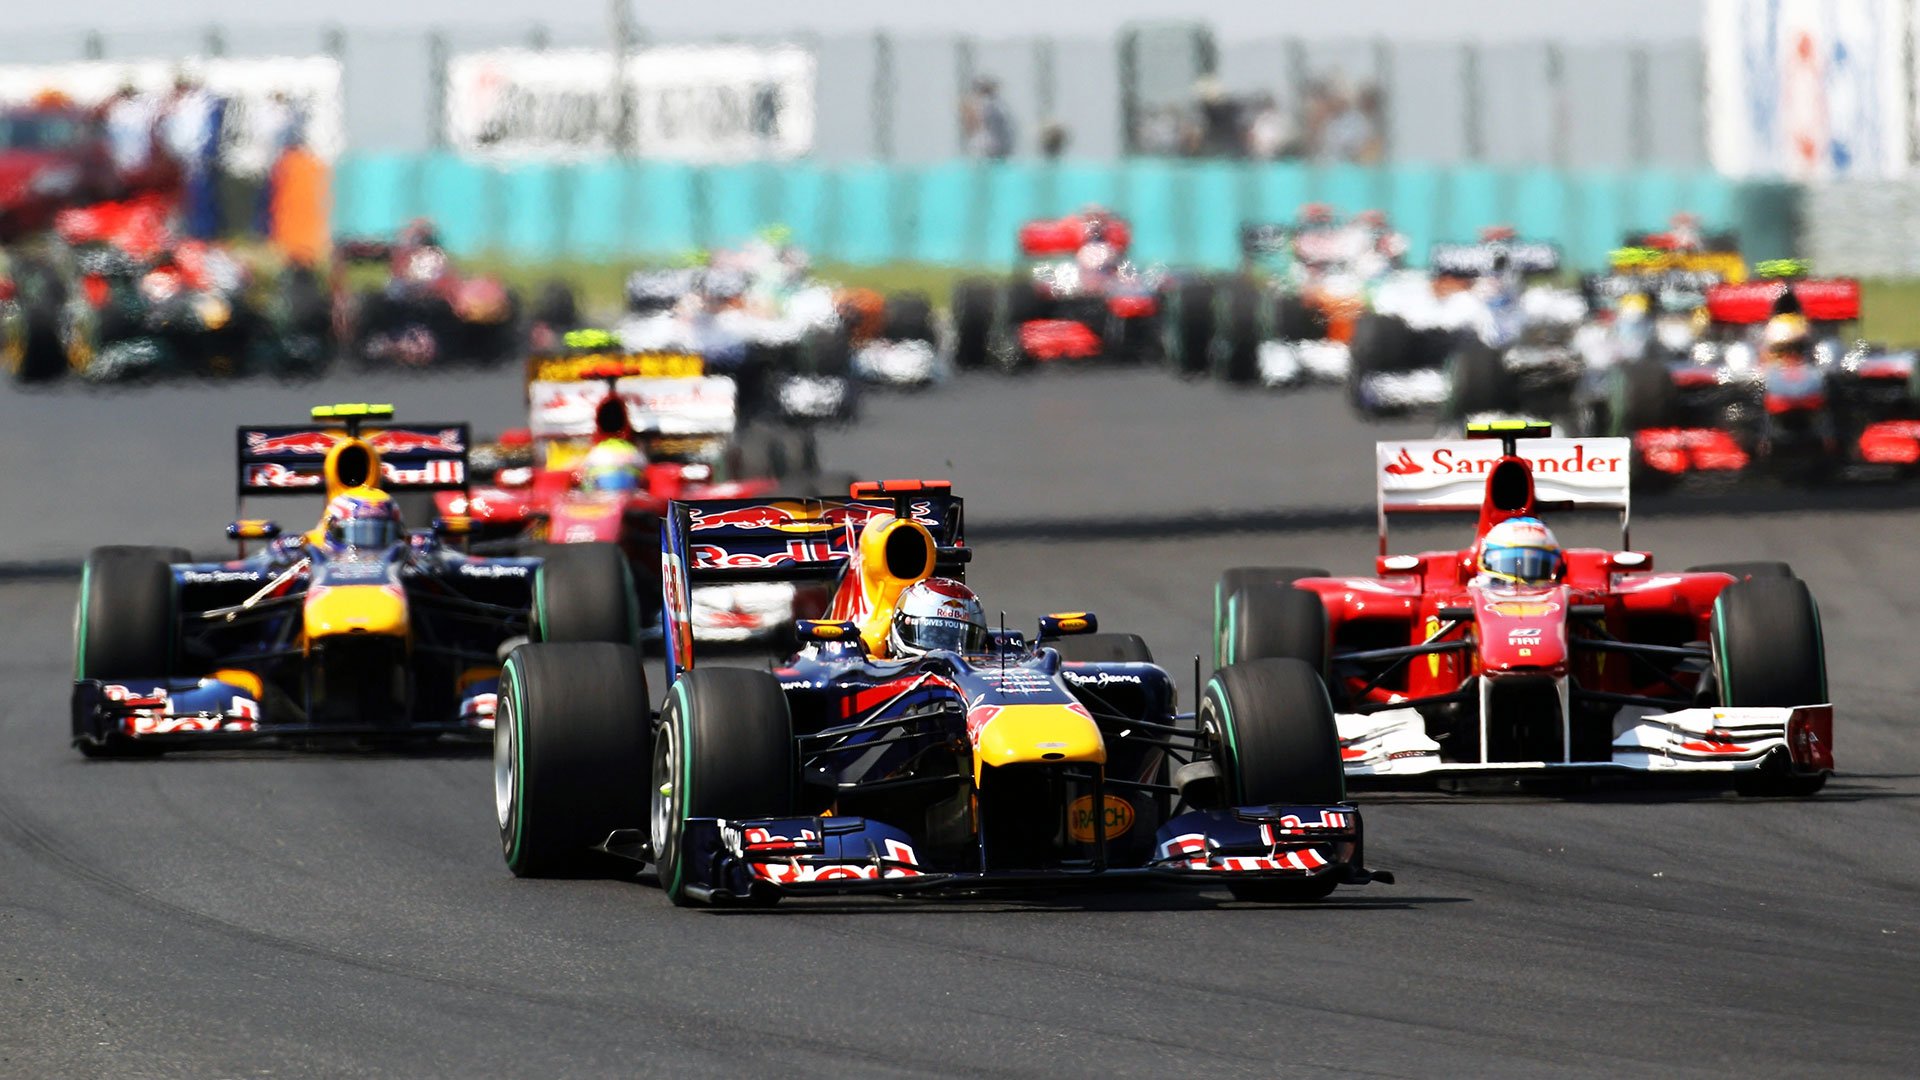 formula one is definitely up there in the list of most expensive sports!